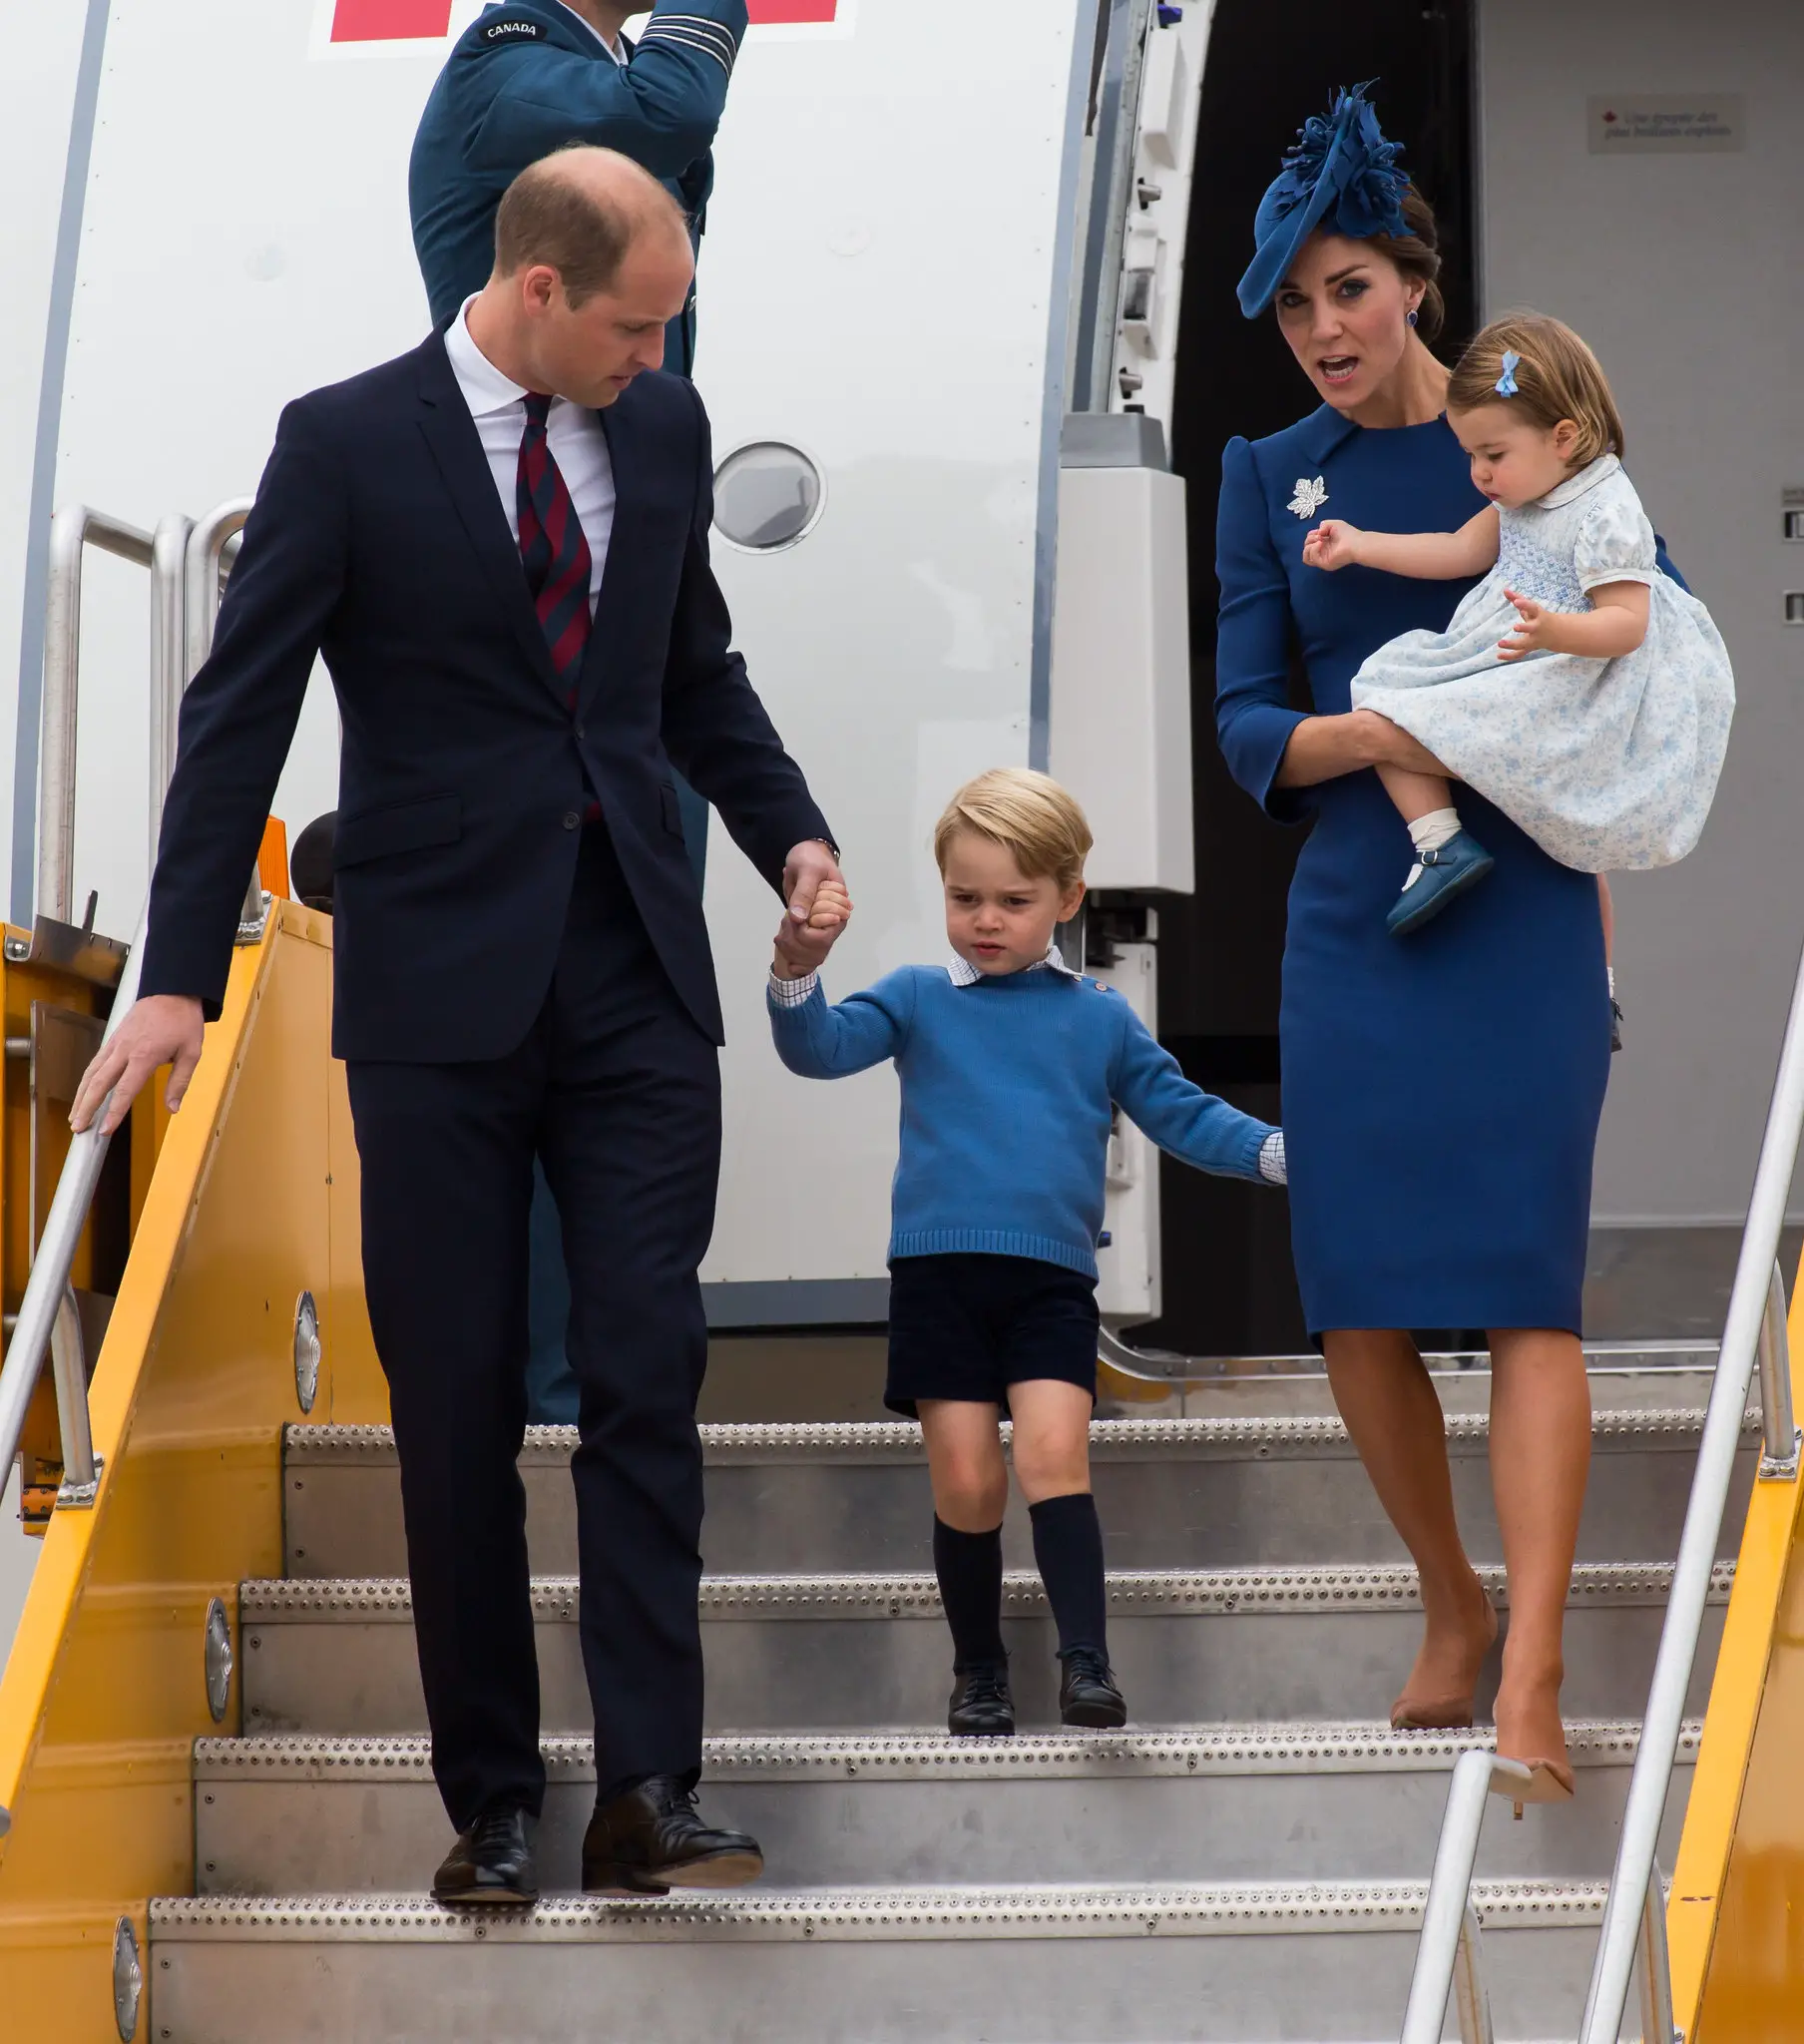 The Duchess of cambridge holding Princess Charlotte during Canada arrival in 2016